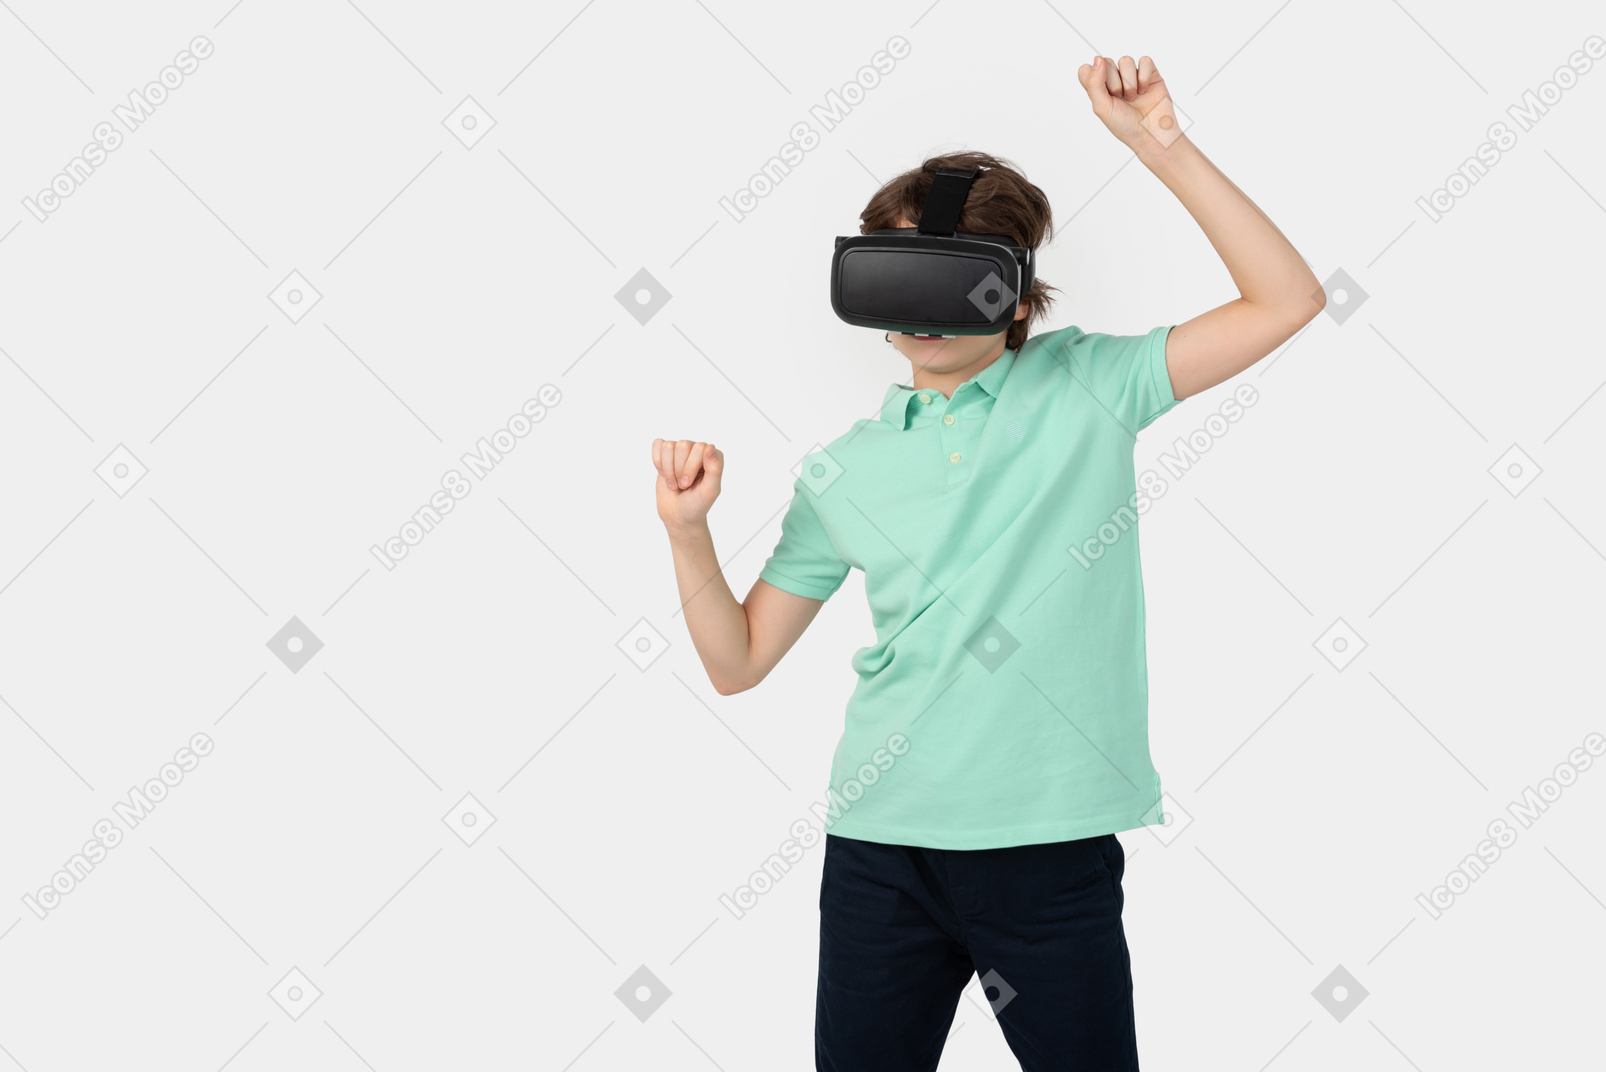 Boy in virtual reality headset holding something invisible in his virtual world